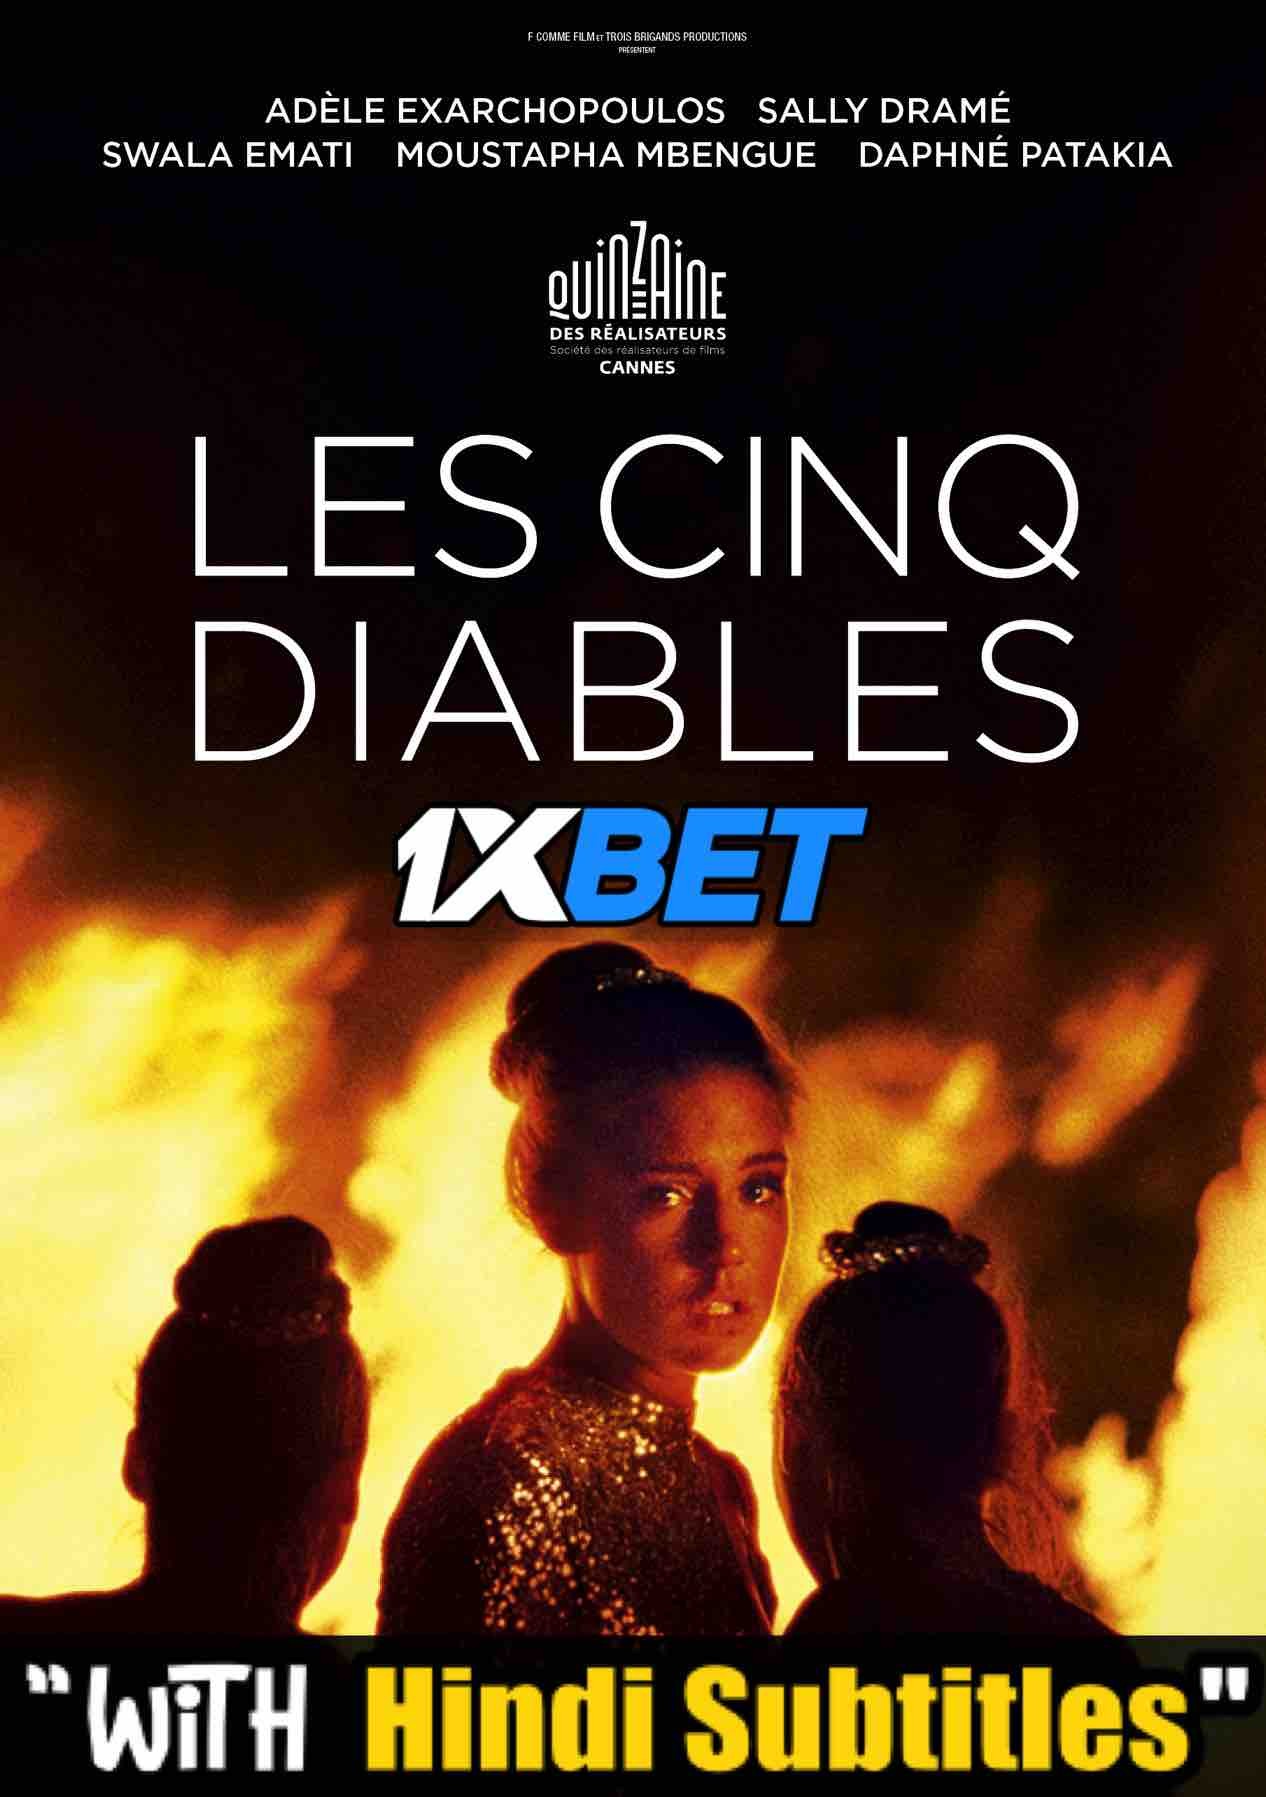 Watch Les cinq diables (2022) Full Movie [In French] With Hindi Subtitles  CAMRip 720p Online Stream – 1XBET